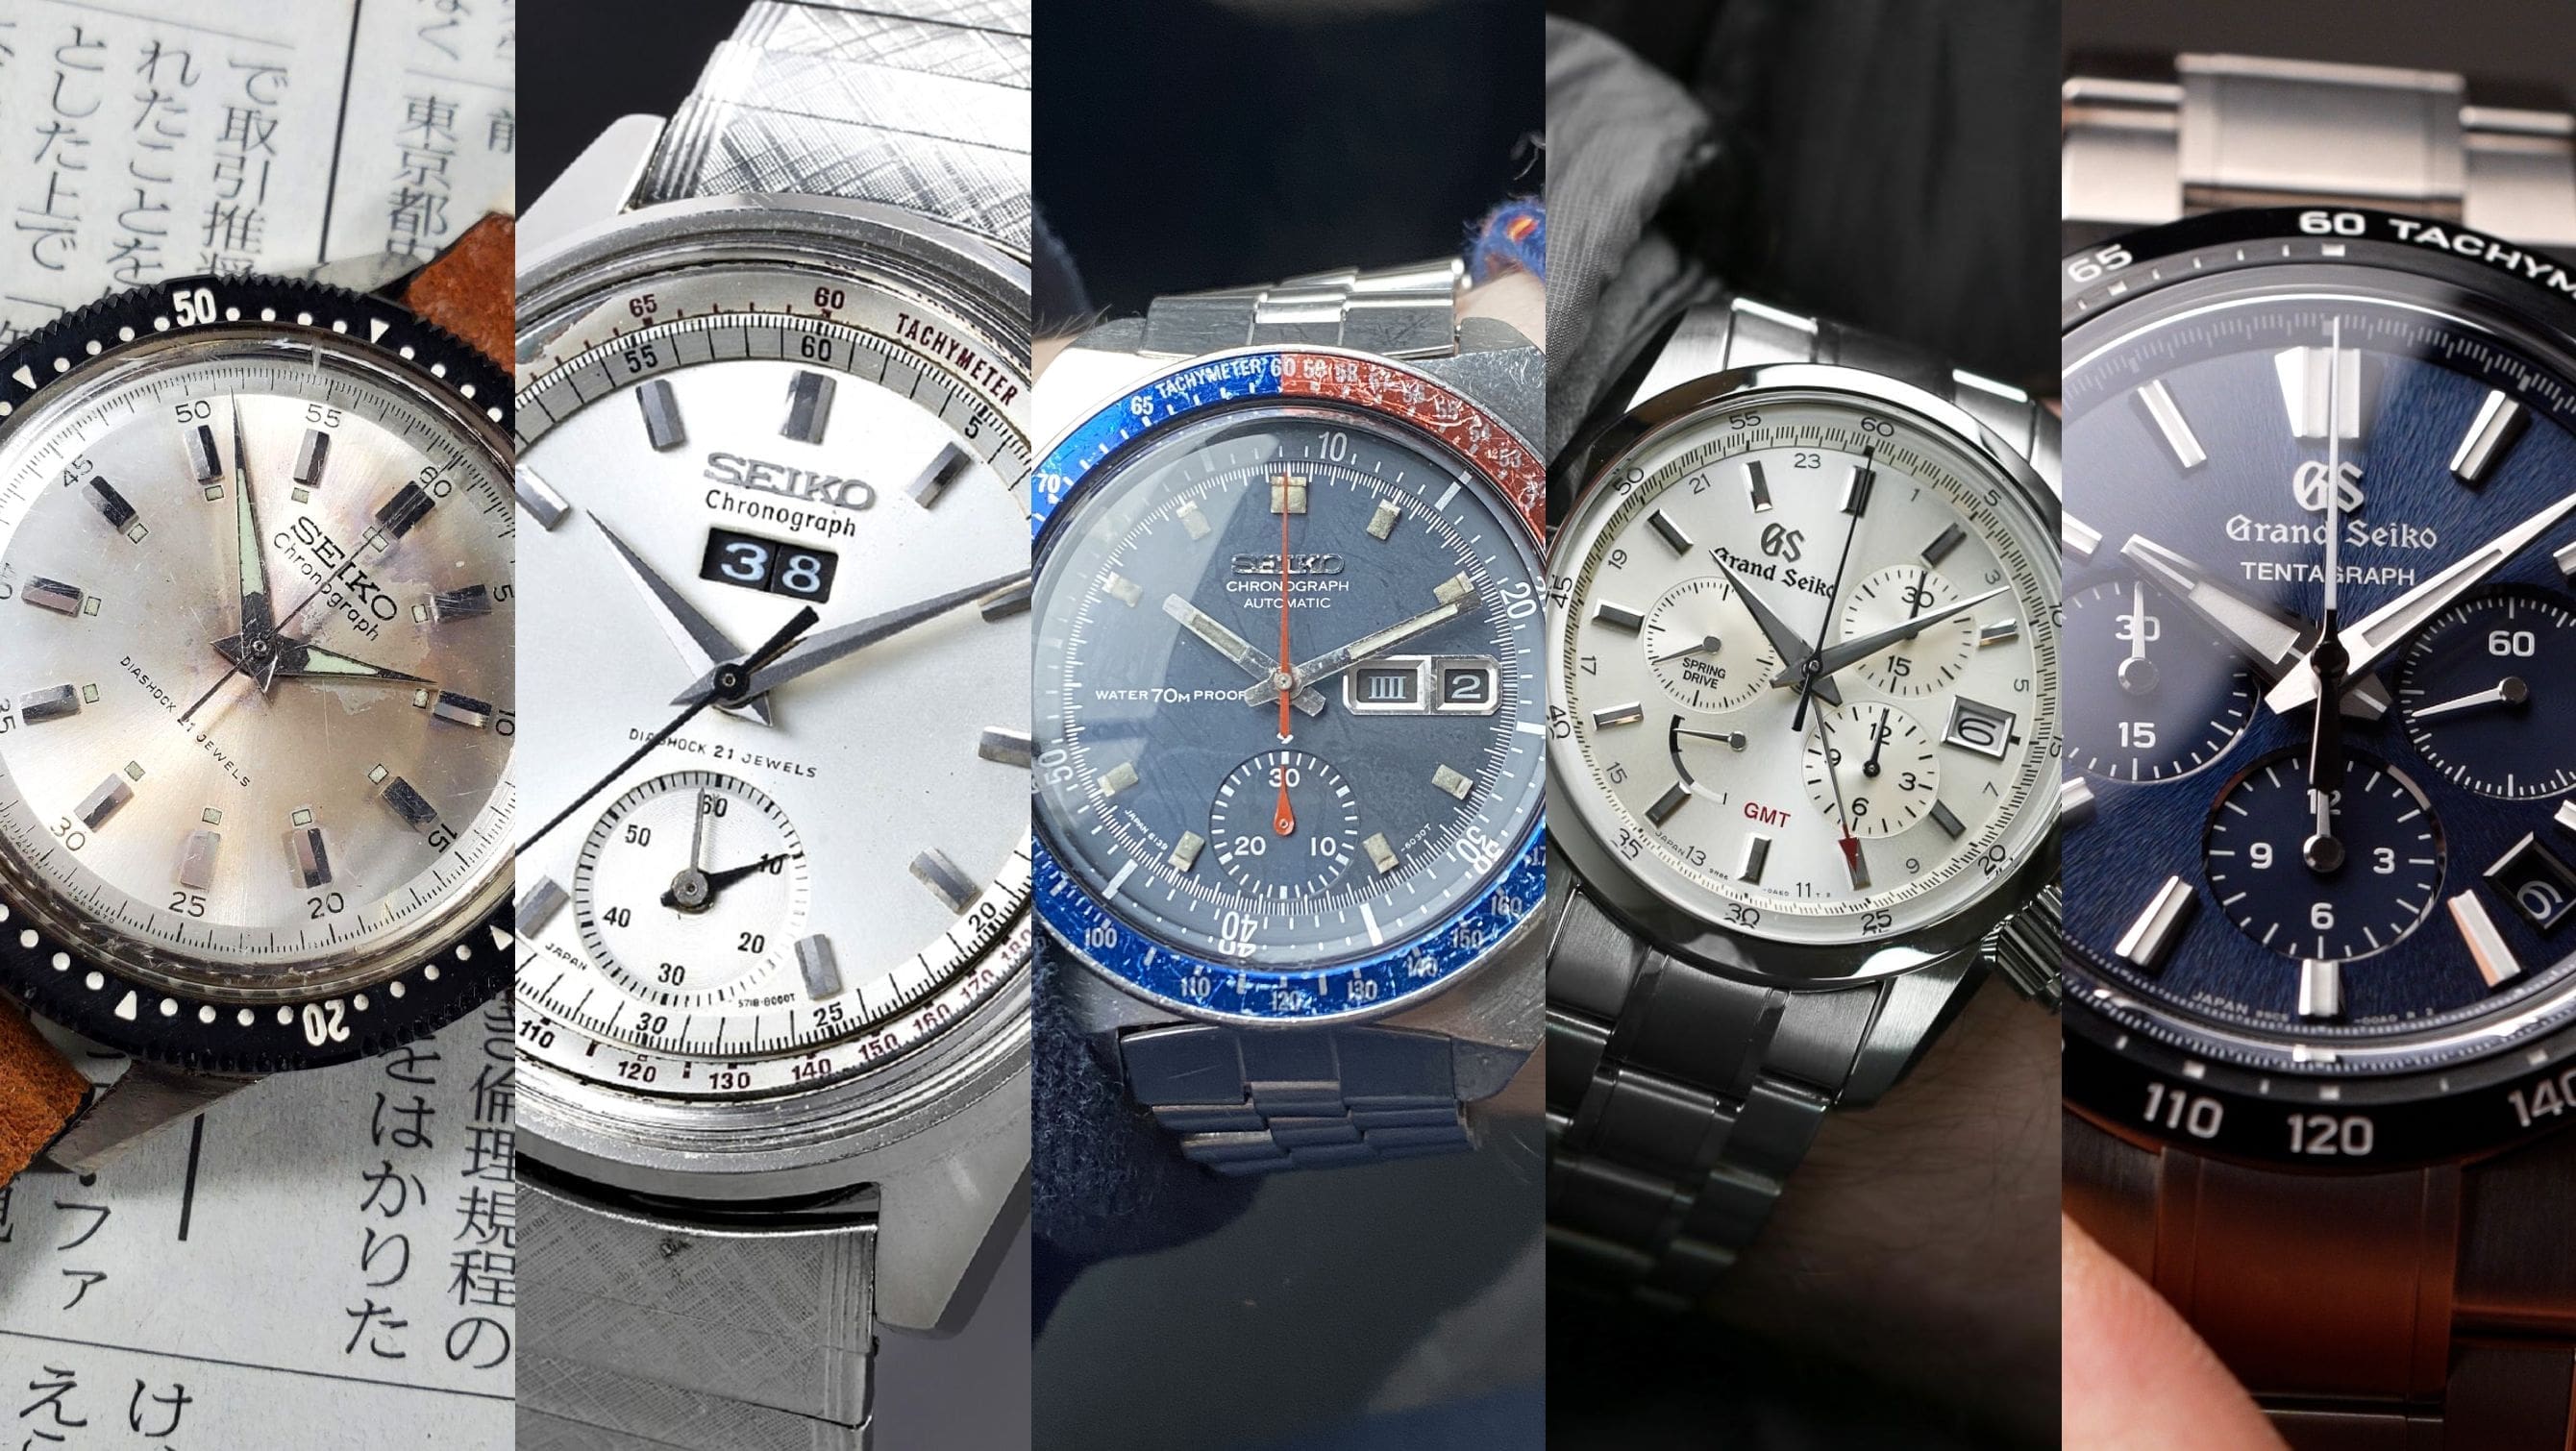 The storied history of the Seiko mechanical chronograph